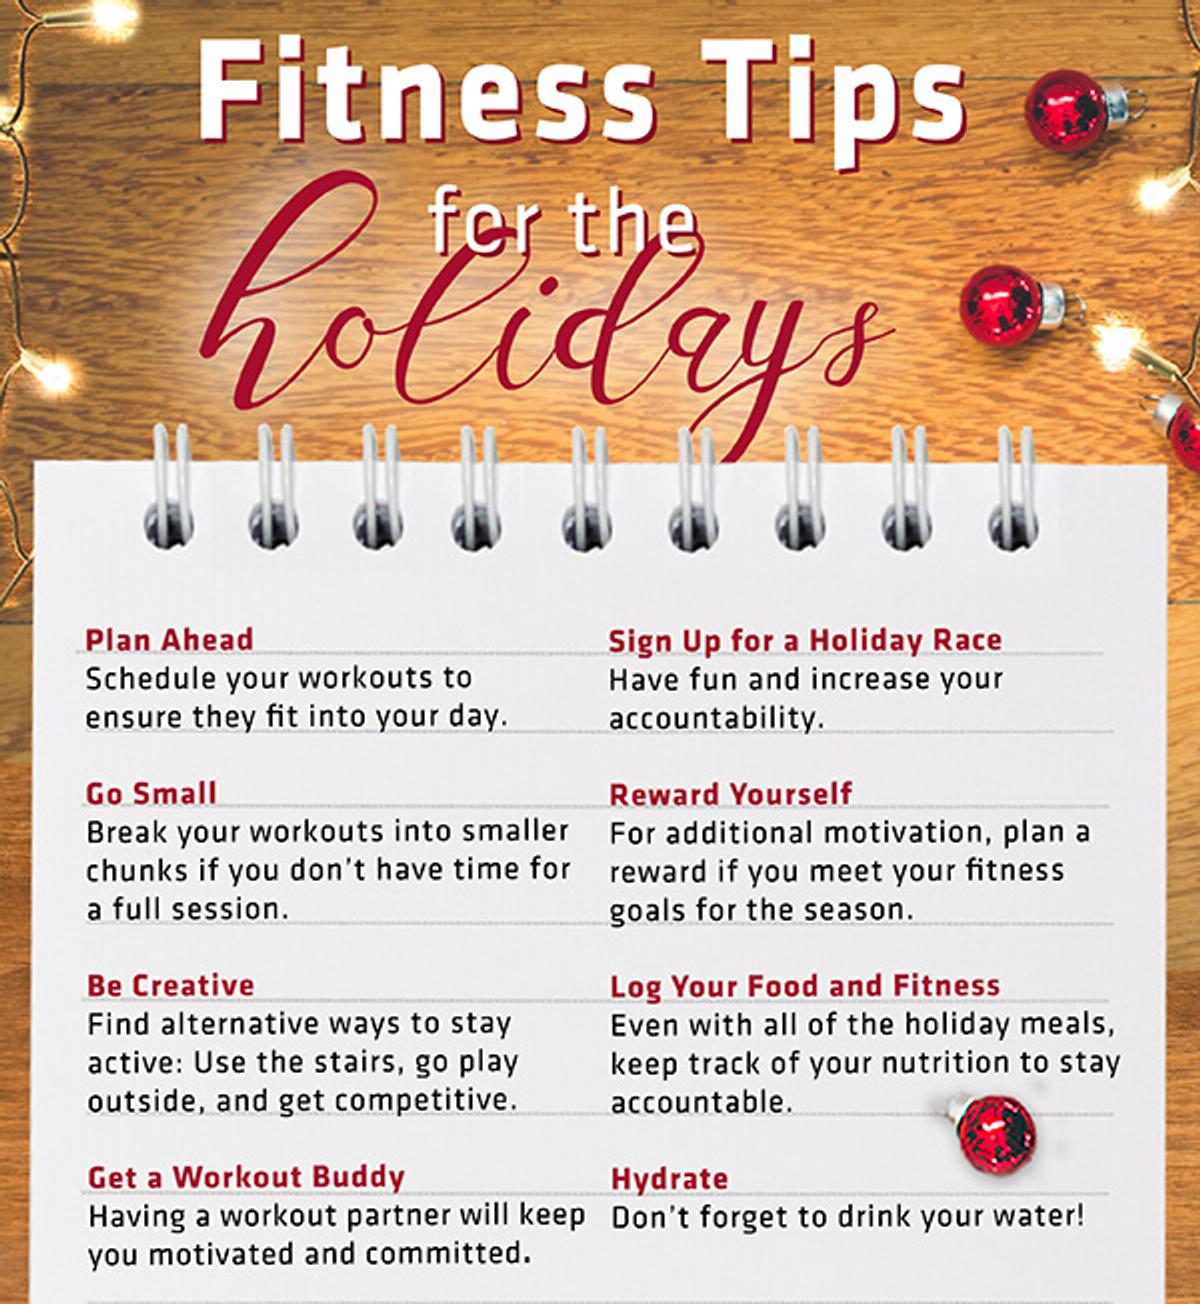 Fitness Tips for the Holidays Infographic